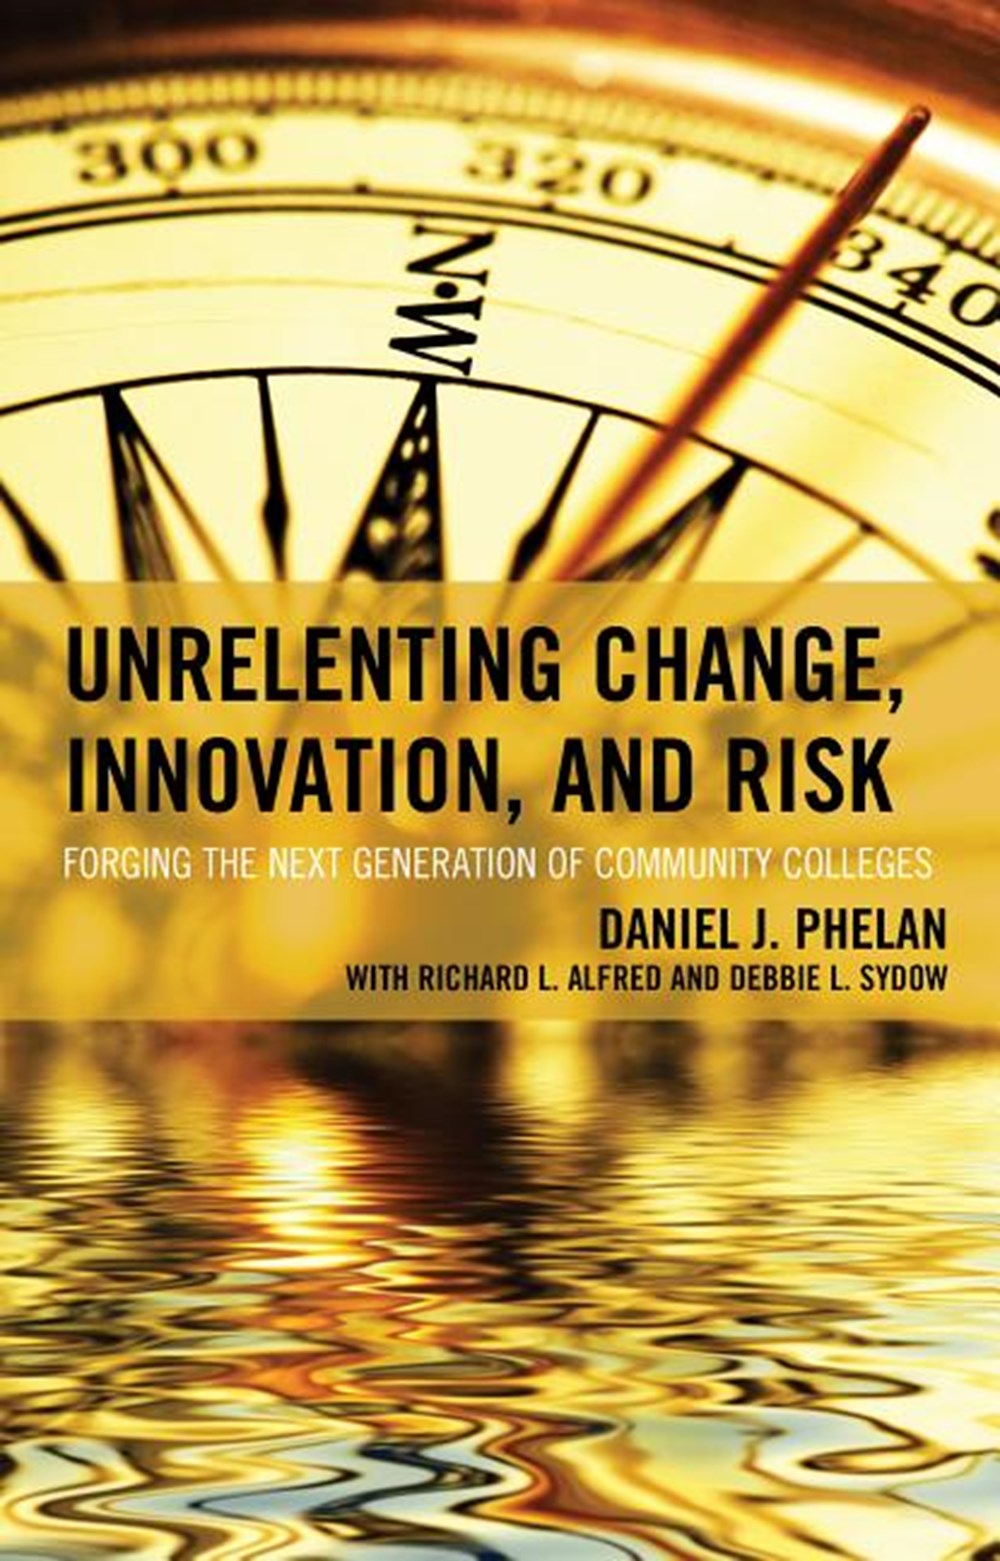 Unrelenting Change, Innovation, and Risk: Forging the Next Generation of Community Colleges